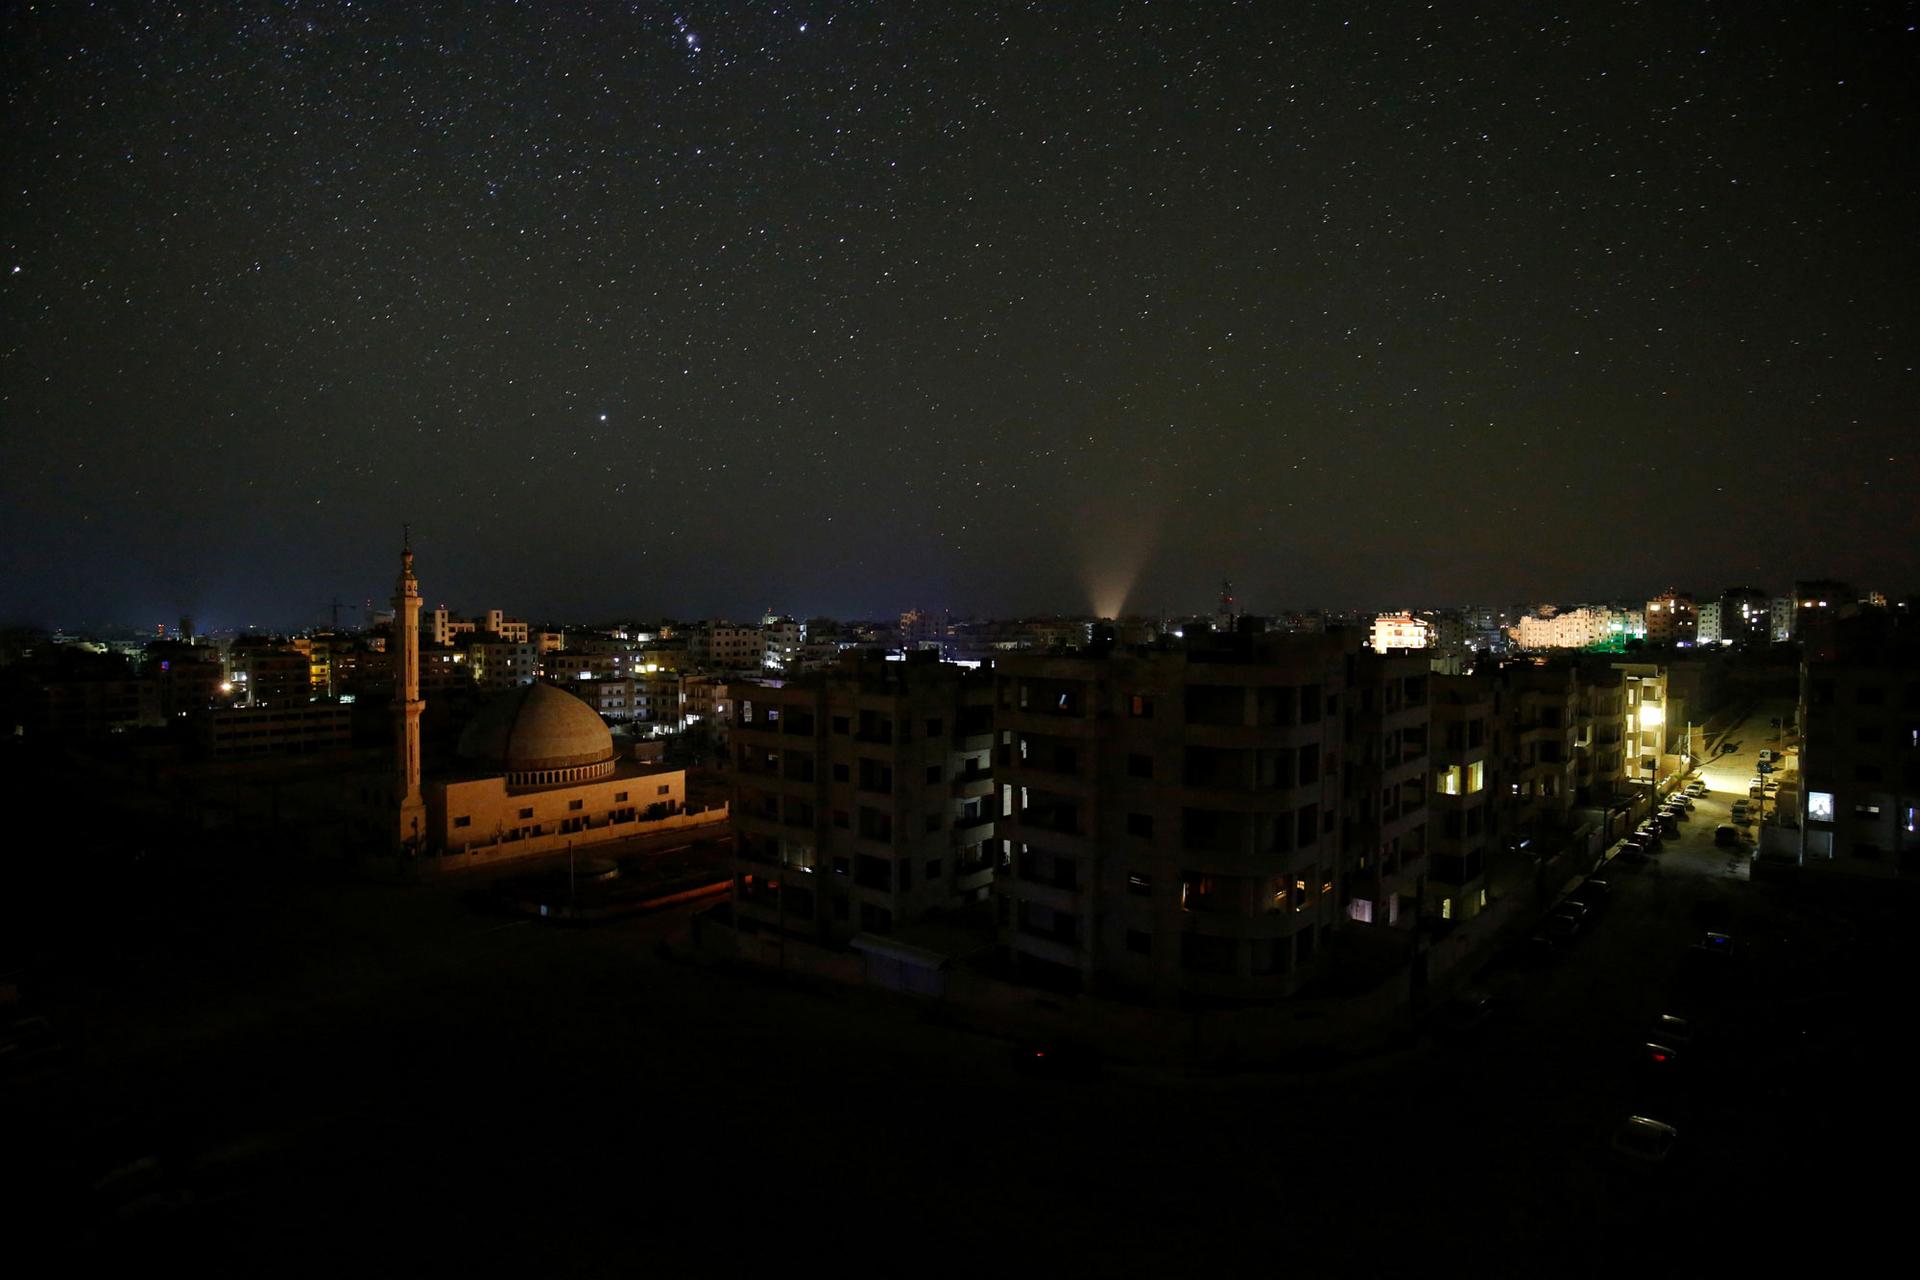 The city of Idlib is seen at night.